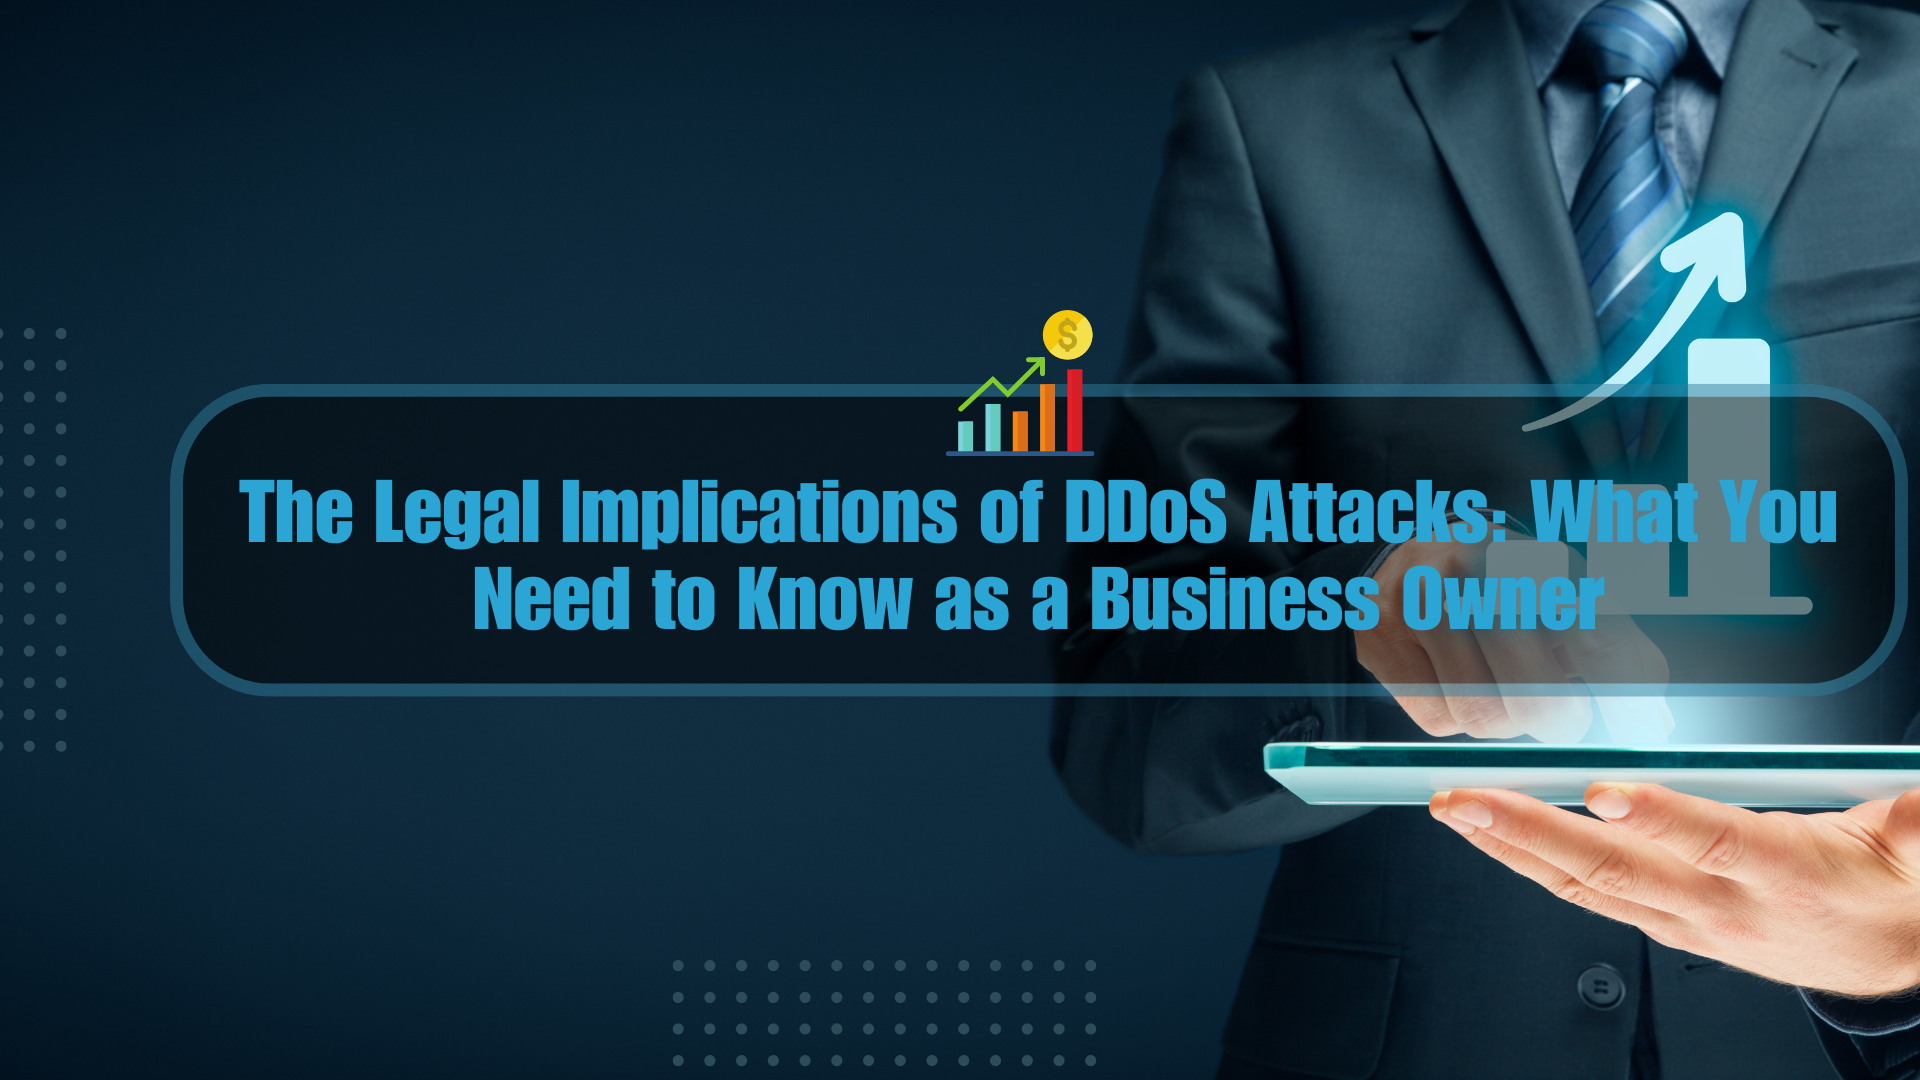 The Legal Implications of DDoS Attacks What You Need to Know as a Business Owner